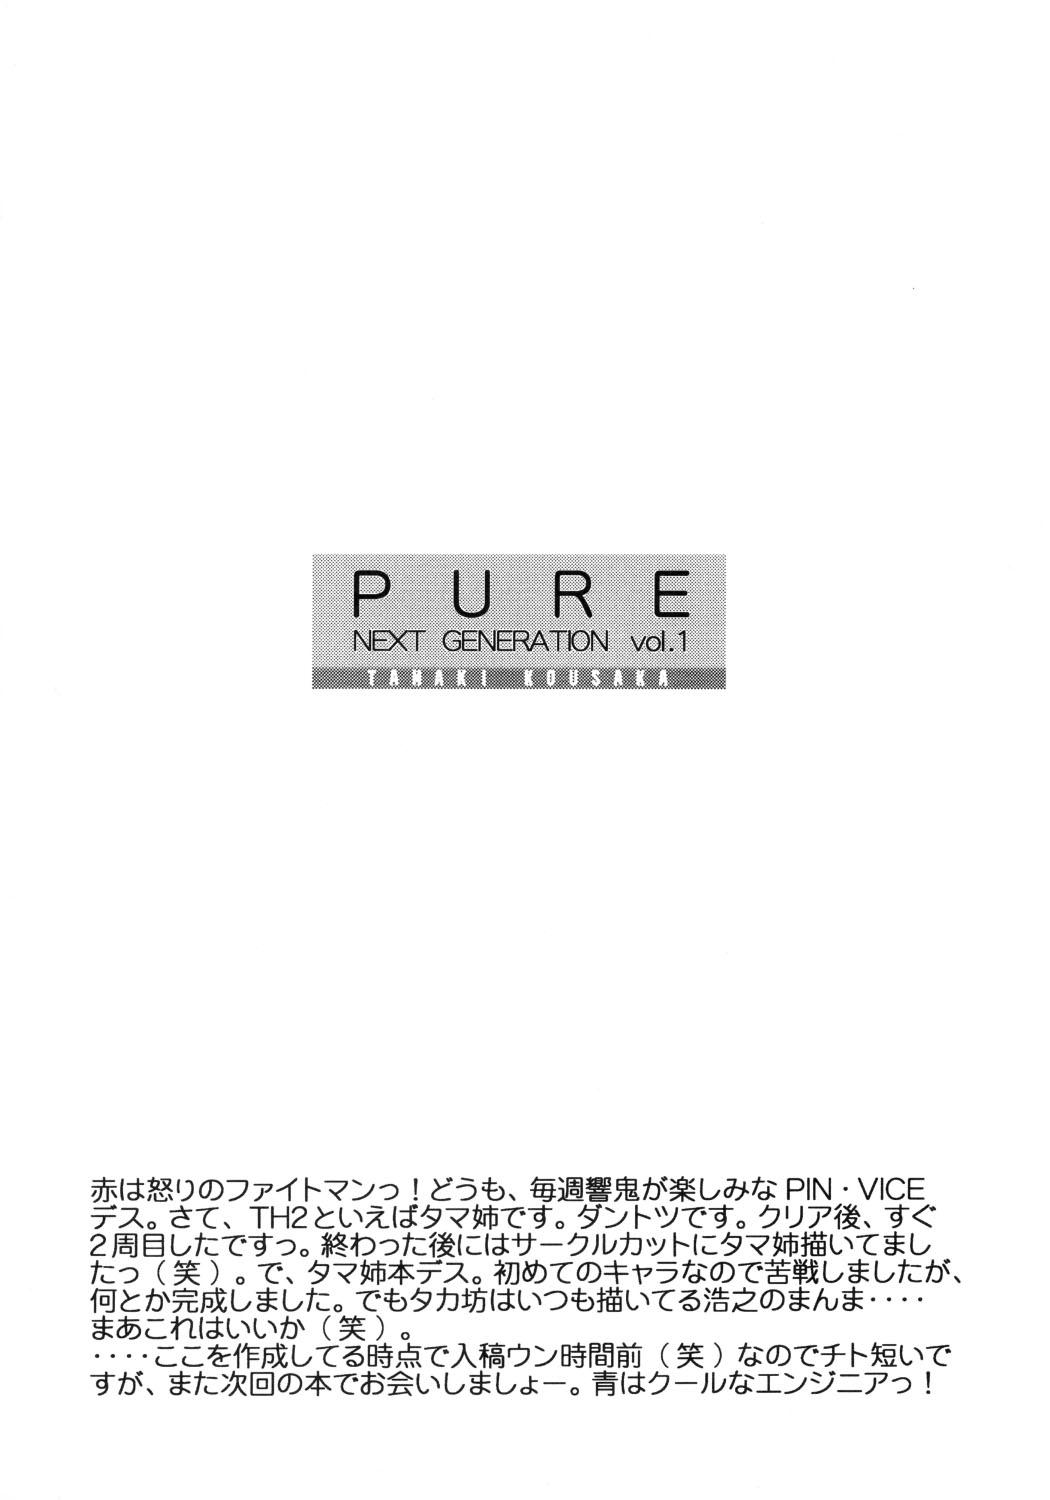 Euro PURE NEXT GENERATION Vol. 1 - Toheart2 Clothed - Page 3